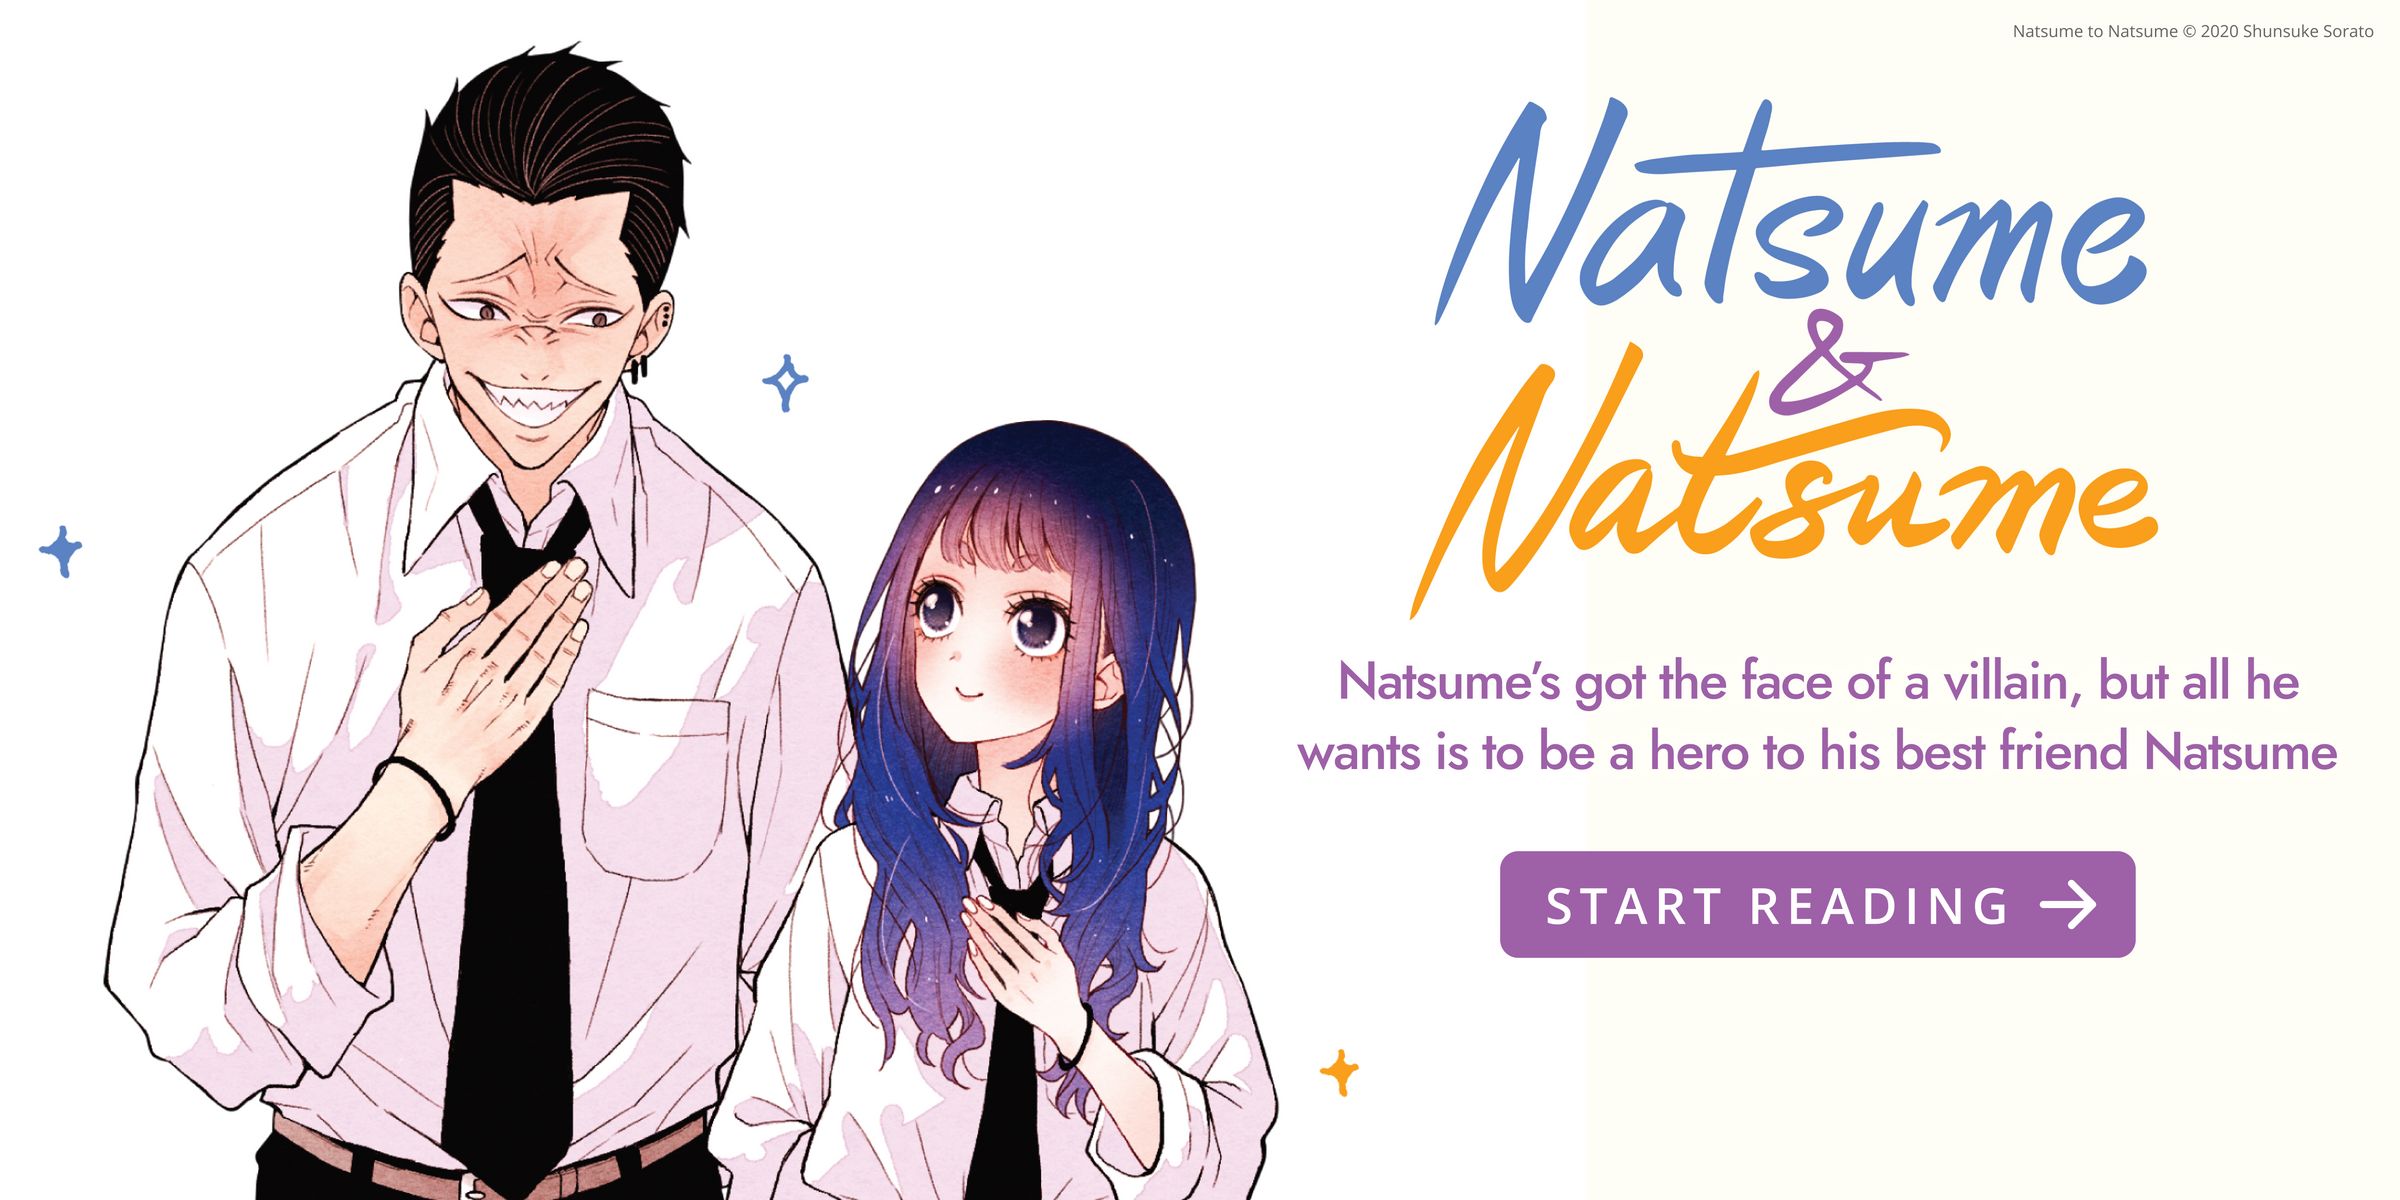 A creepy-looking boy smiling and a cute girl looking at him. Natsume and Natsume. Natsume’s got the face of a villain, but all he wants is to be a hero to his best friend Natsume. Start Reading.